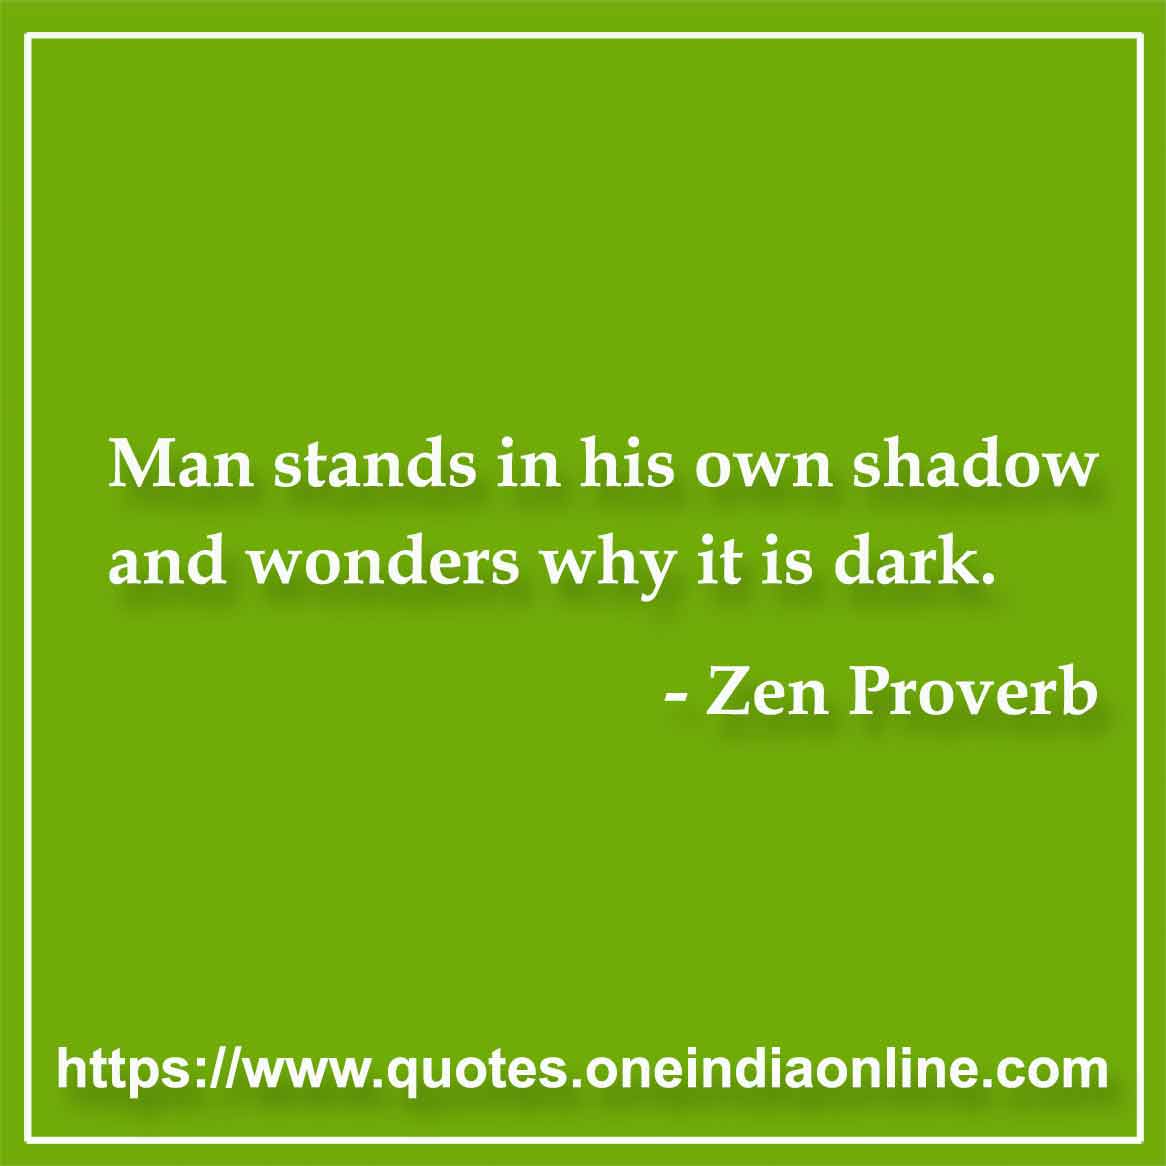 Man stands in his own shadow and wonders why it is dark. 

